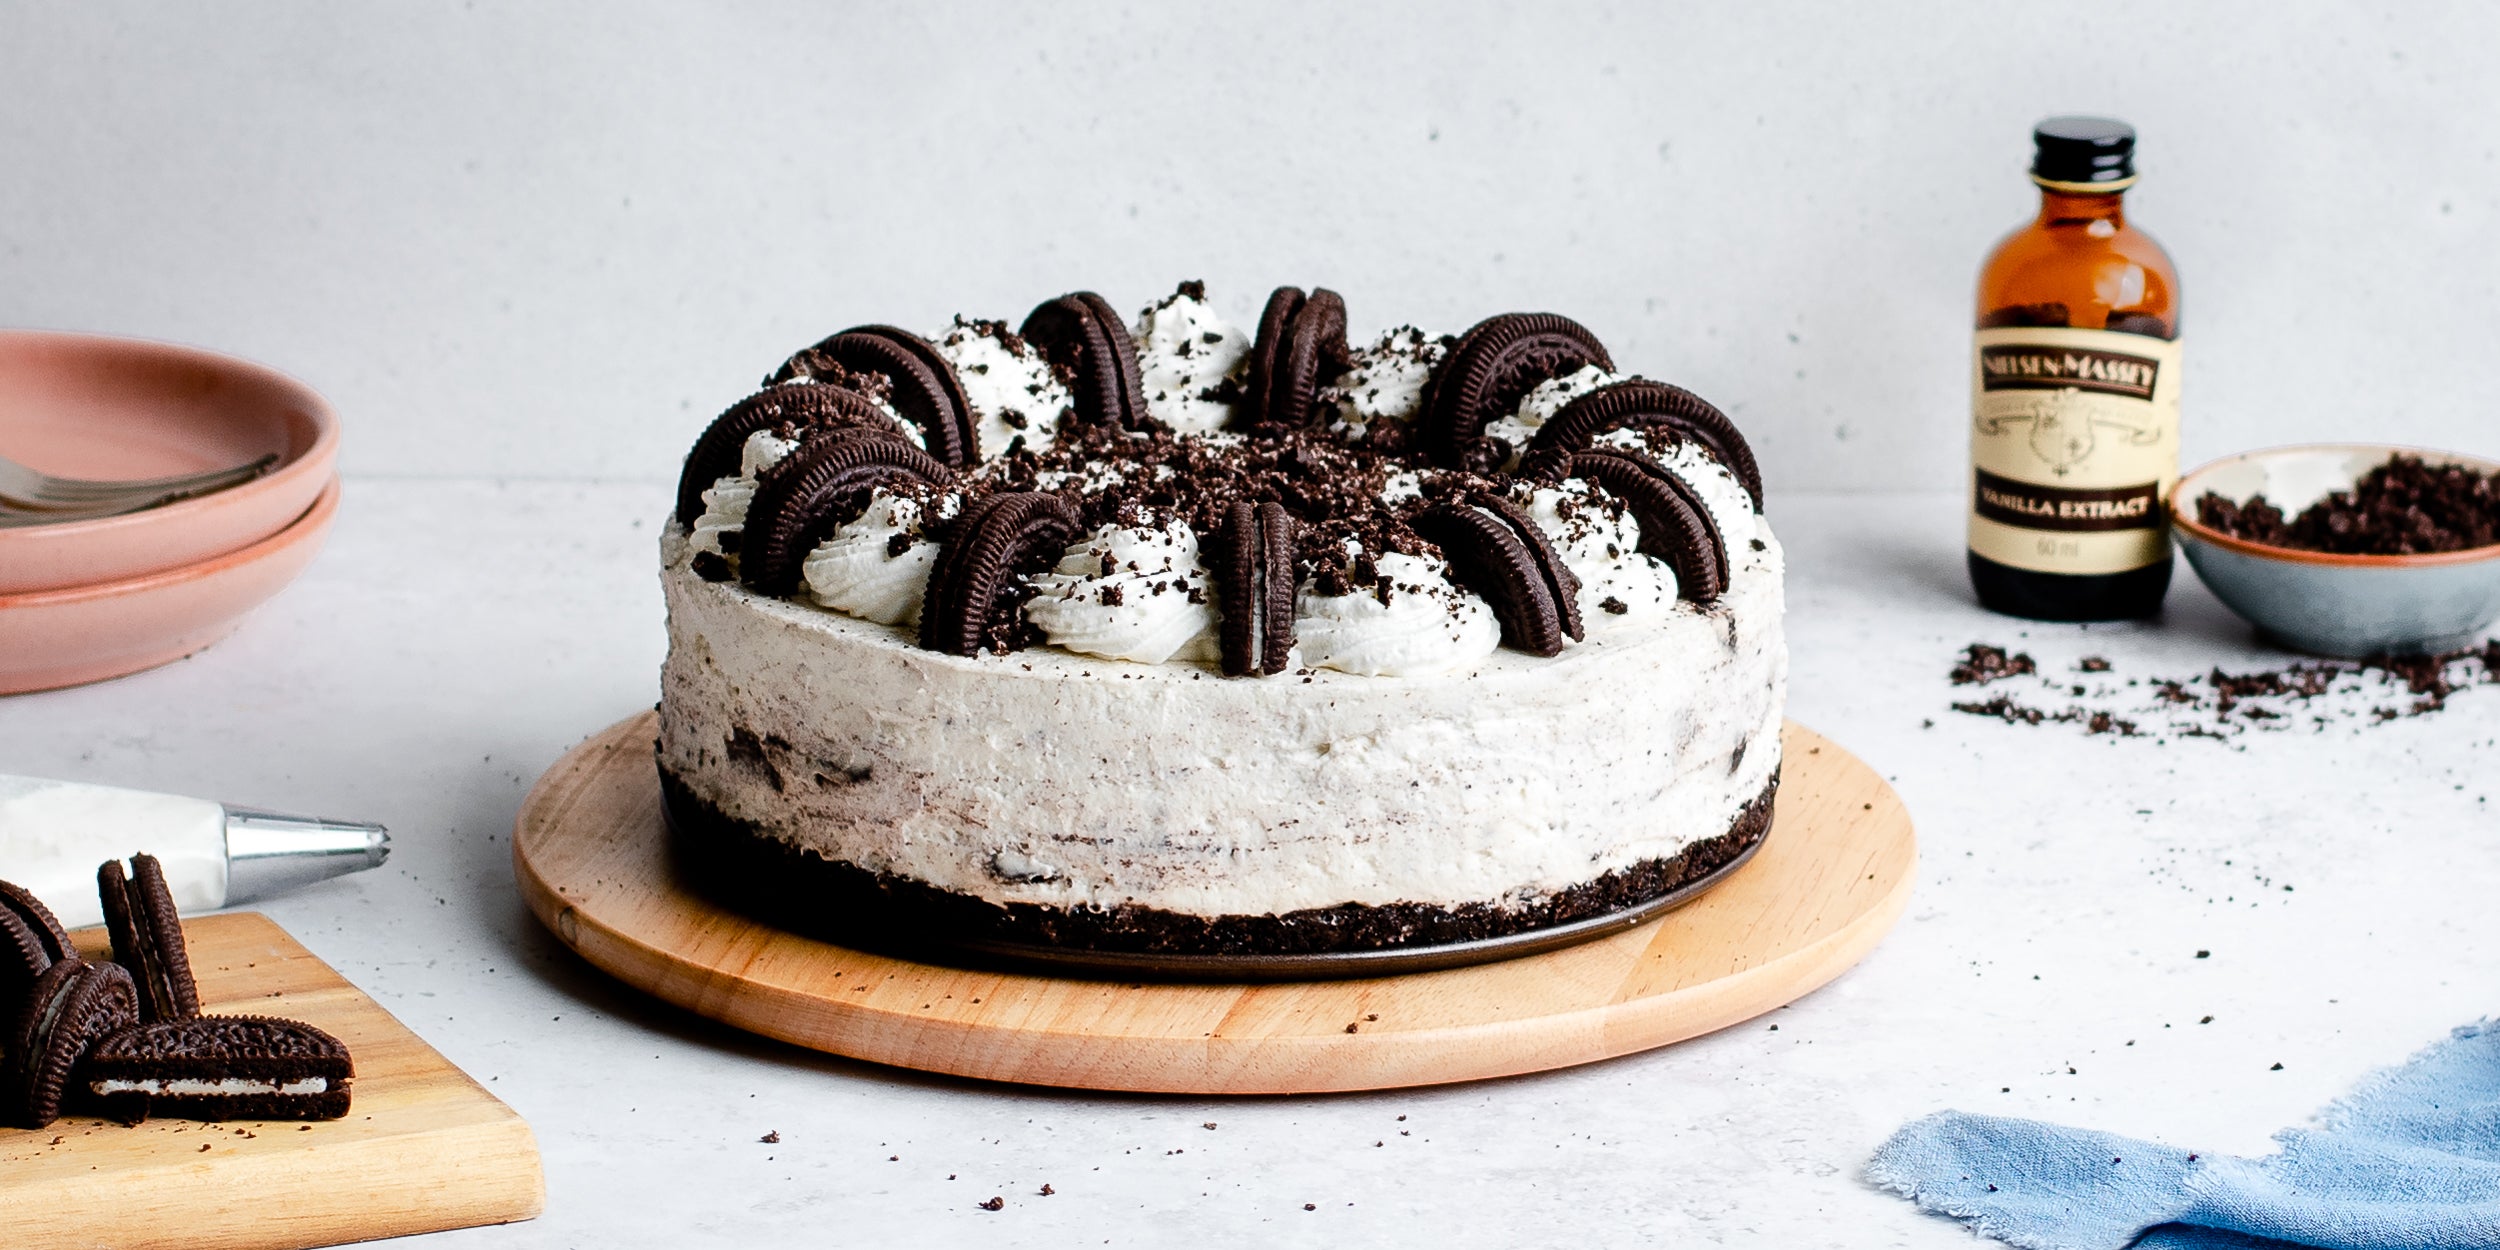 No-bake Oreo cheesecake with bottle of vanilla extract in background